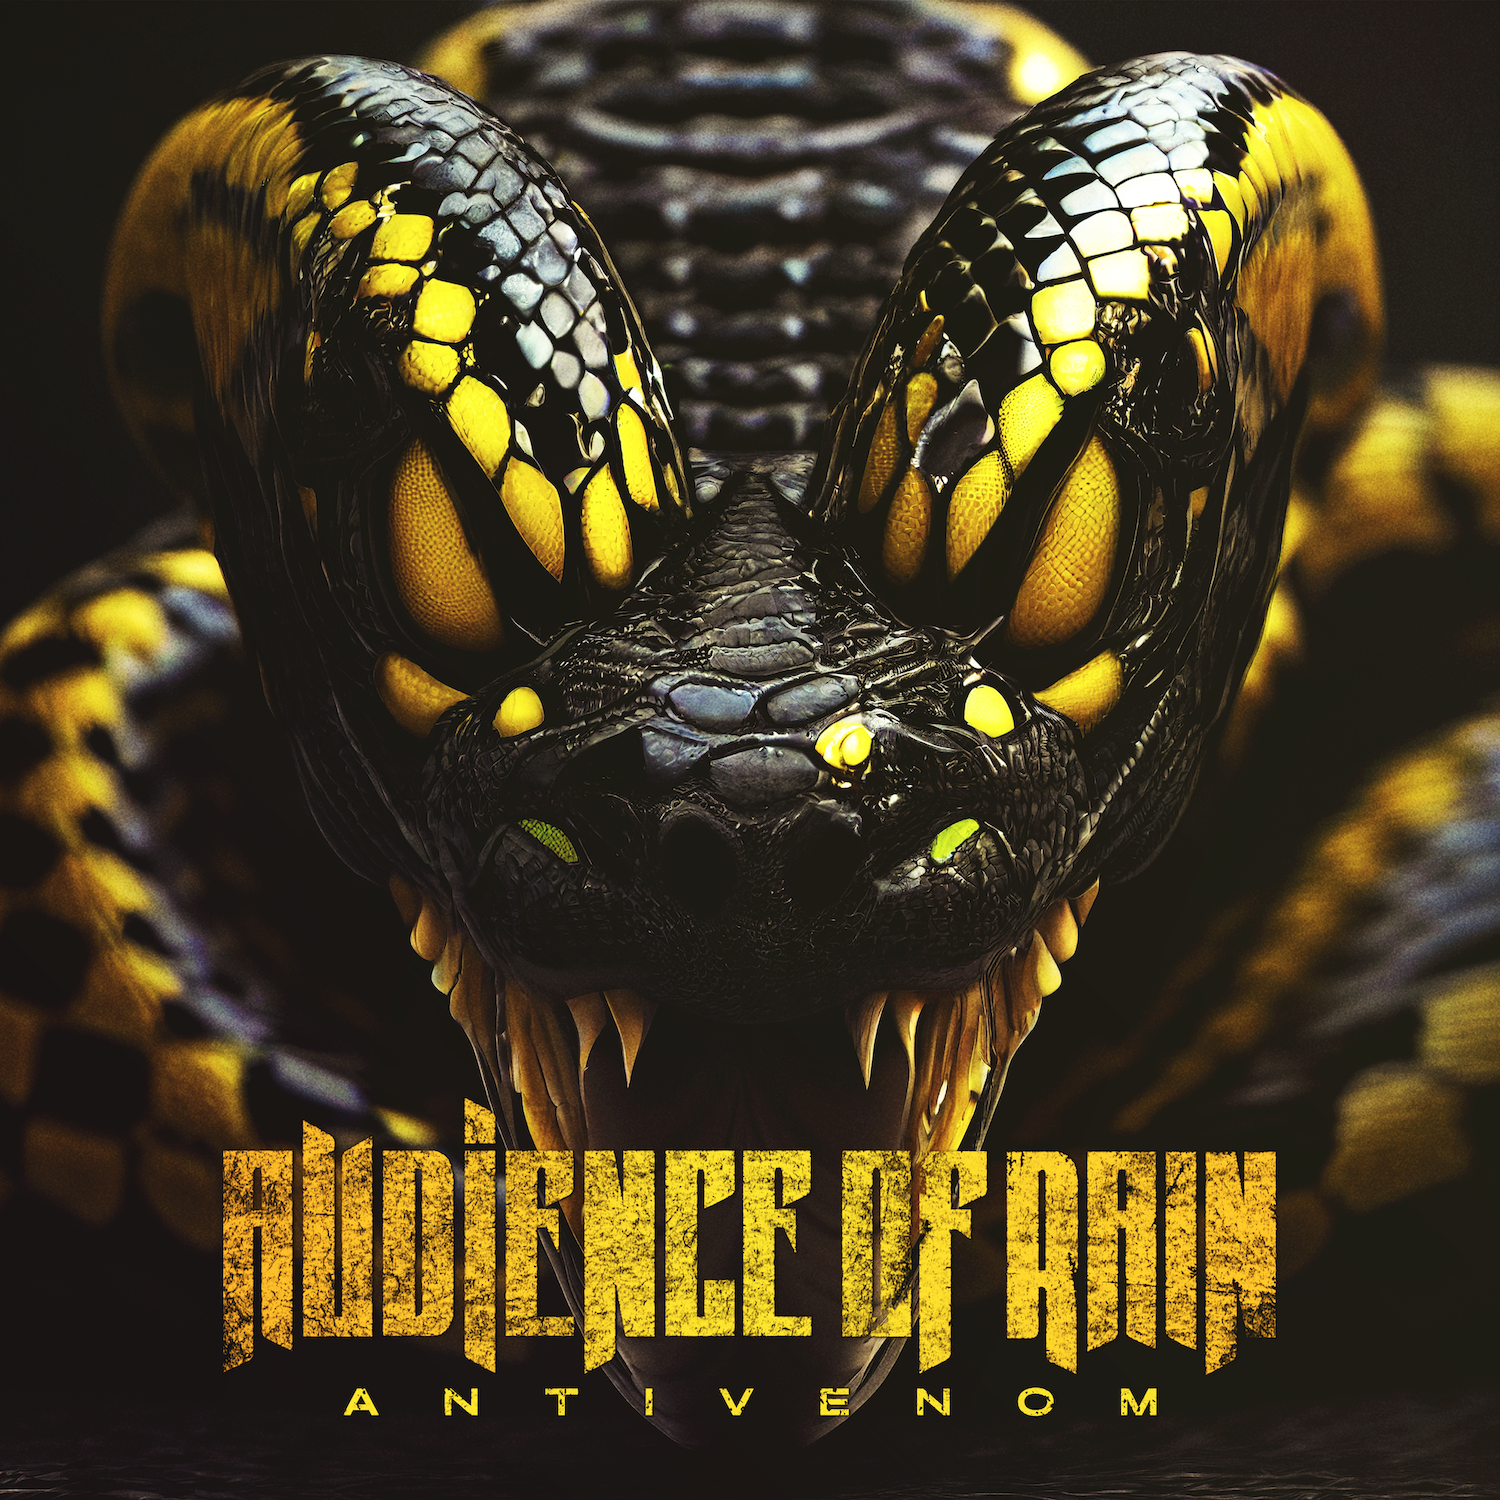 REVIEW: “Antivenom” by Audience of Rain